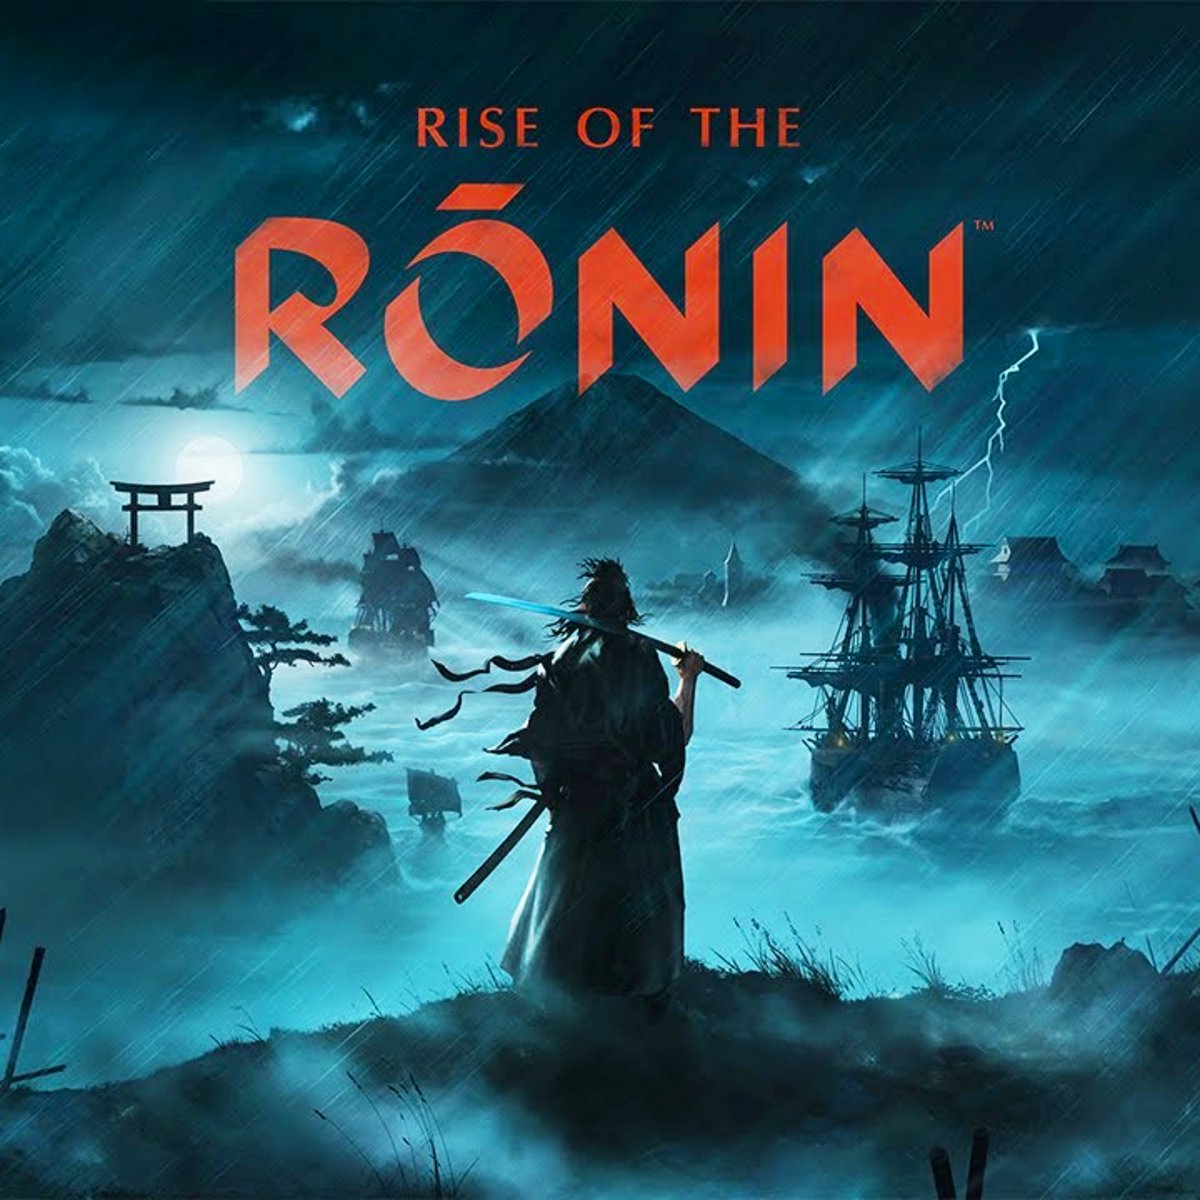 @ShiningVoices is proud of our super talented voices in Rise of Ronin! @JamesPhoon_ and @Gordon74Cooper! #RiseOfRonin #gaming #gamedevelopment #GamingCommunity #gaming_news